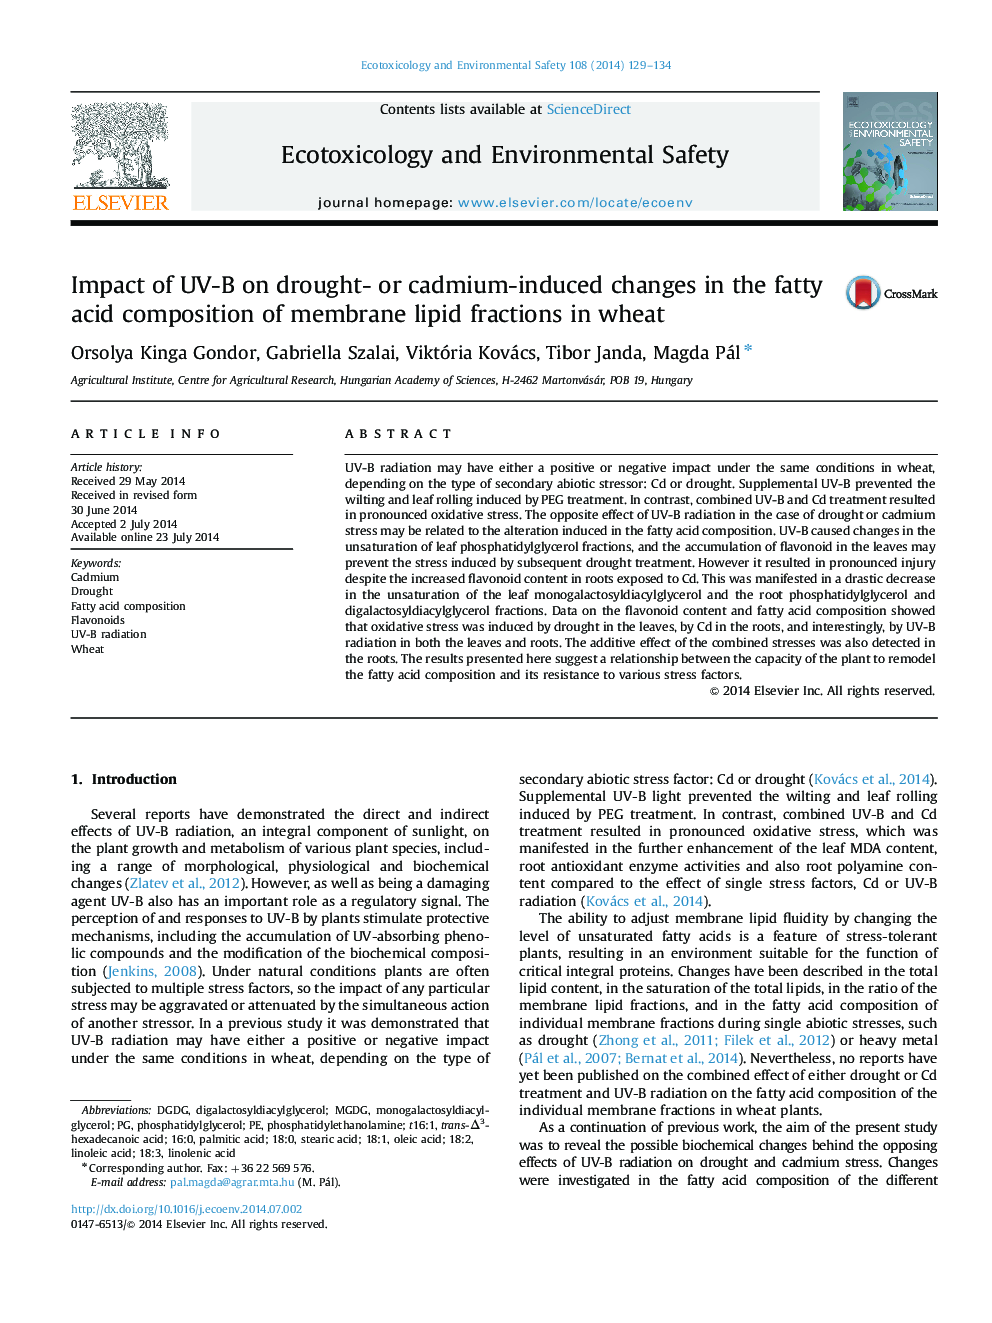 Impact of UV-B on drought- or cadmium-induced changes in the fatty acid composition of membrane lipid fractions in wheat